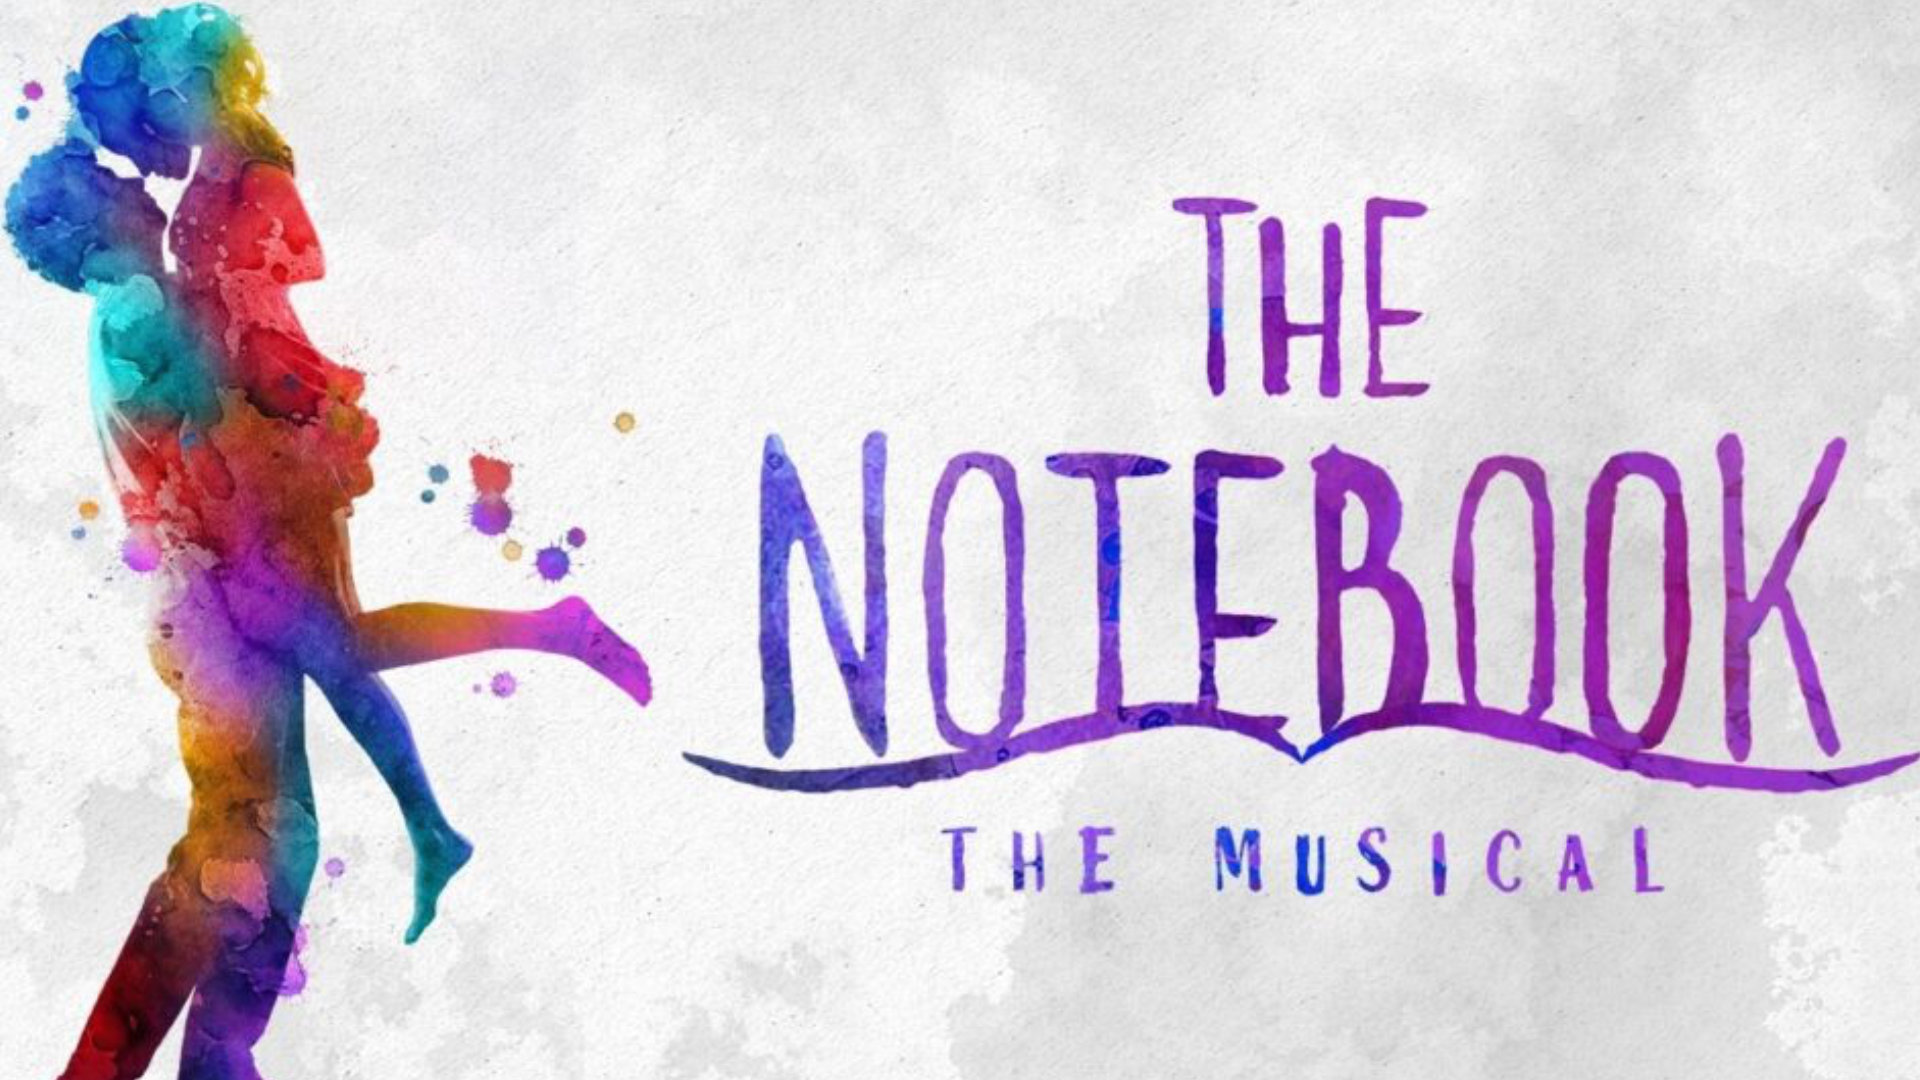 The Notebook musical